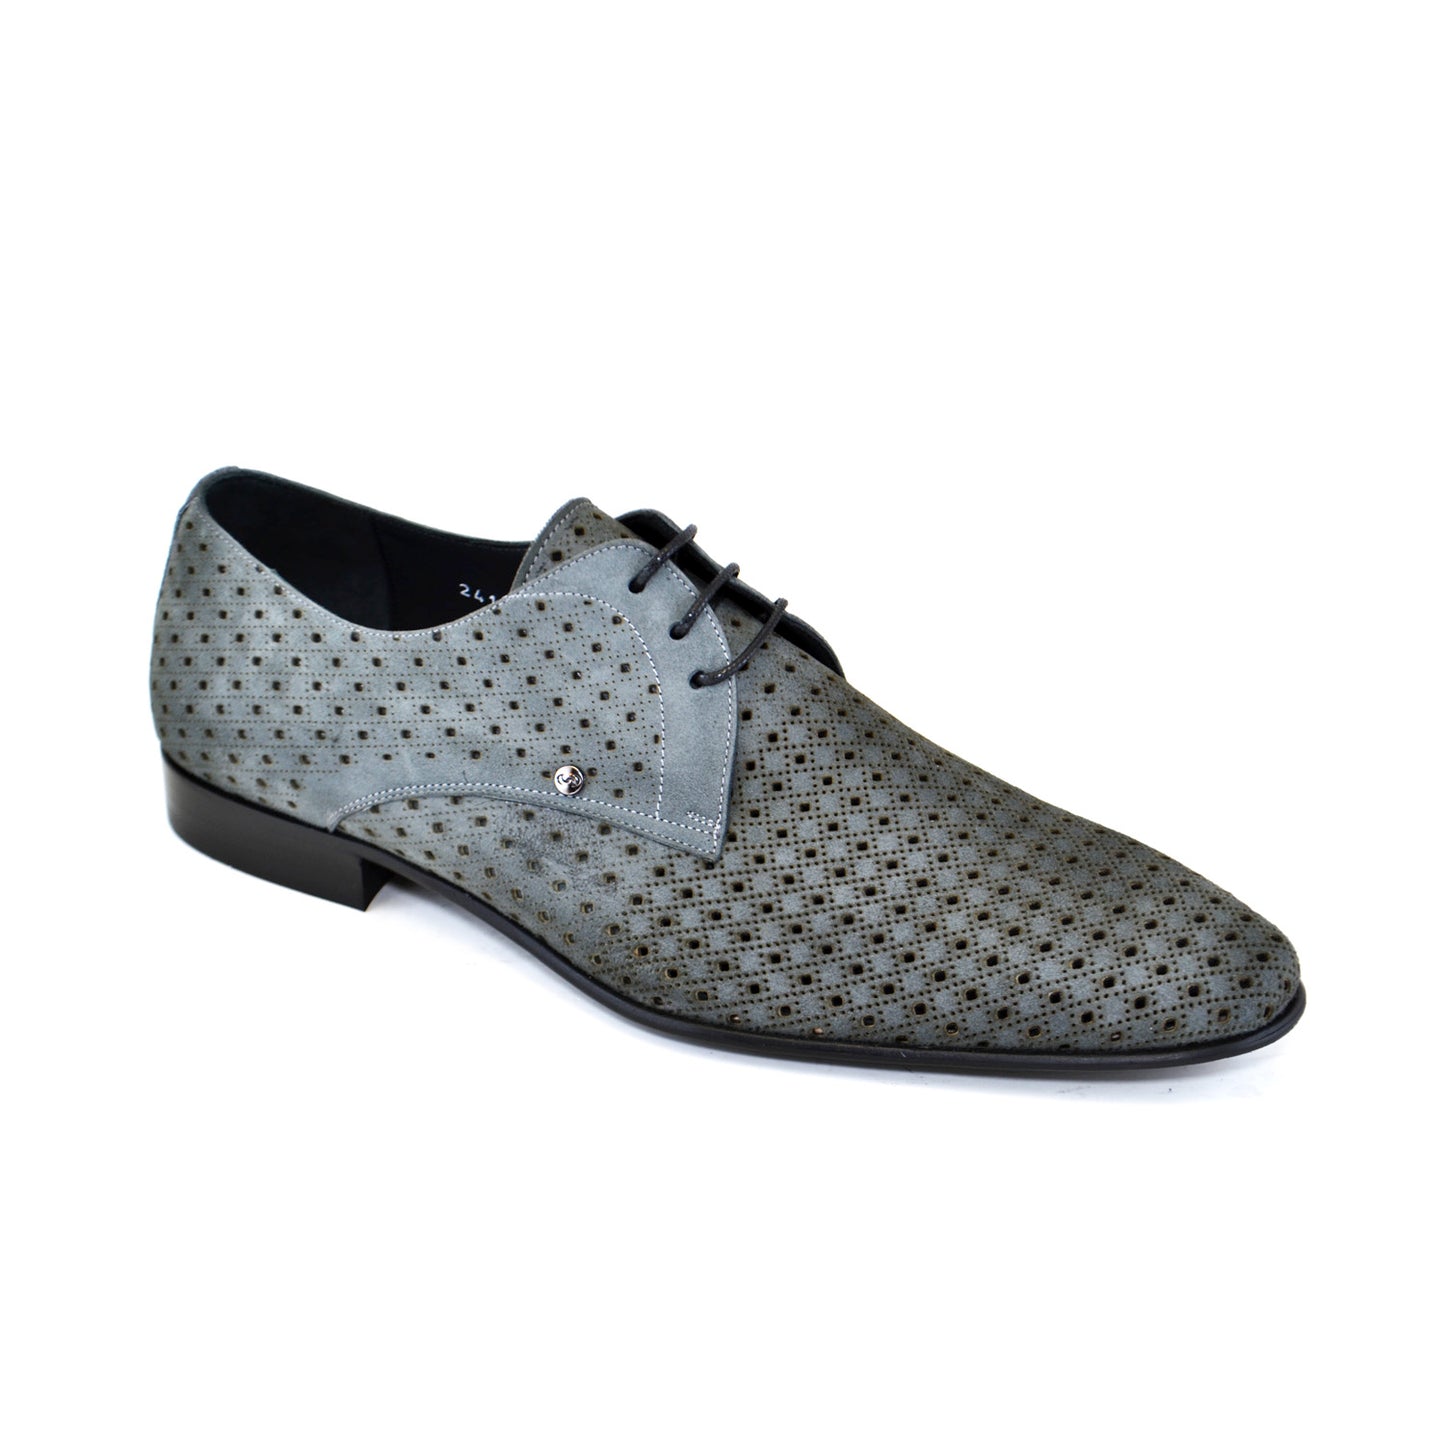 C149-2414 Nubak Gray Perforated Lace Up